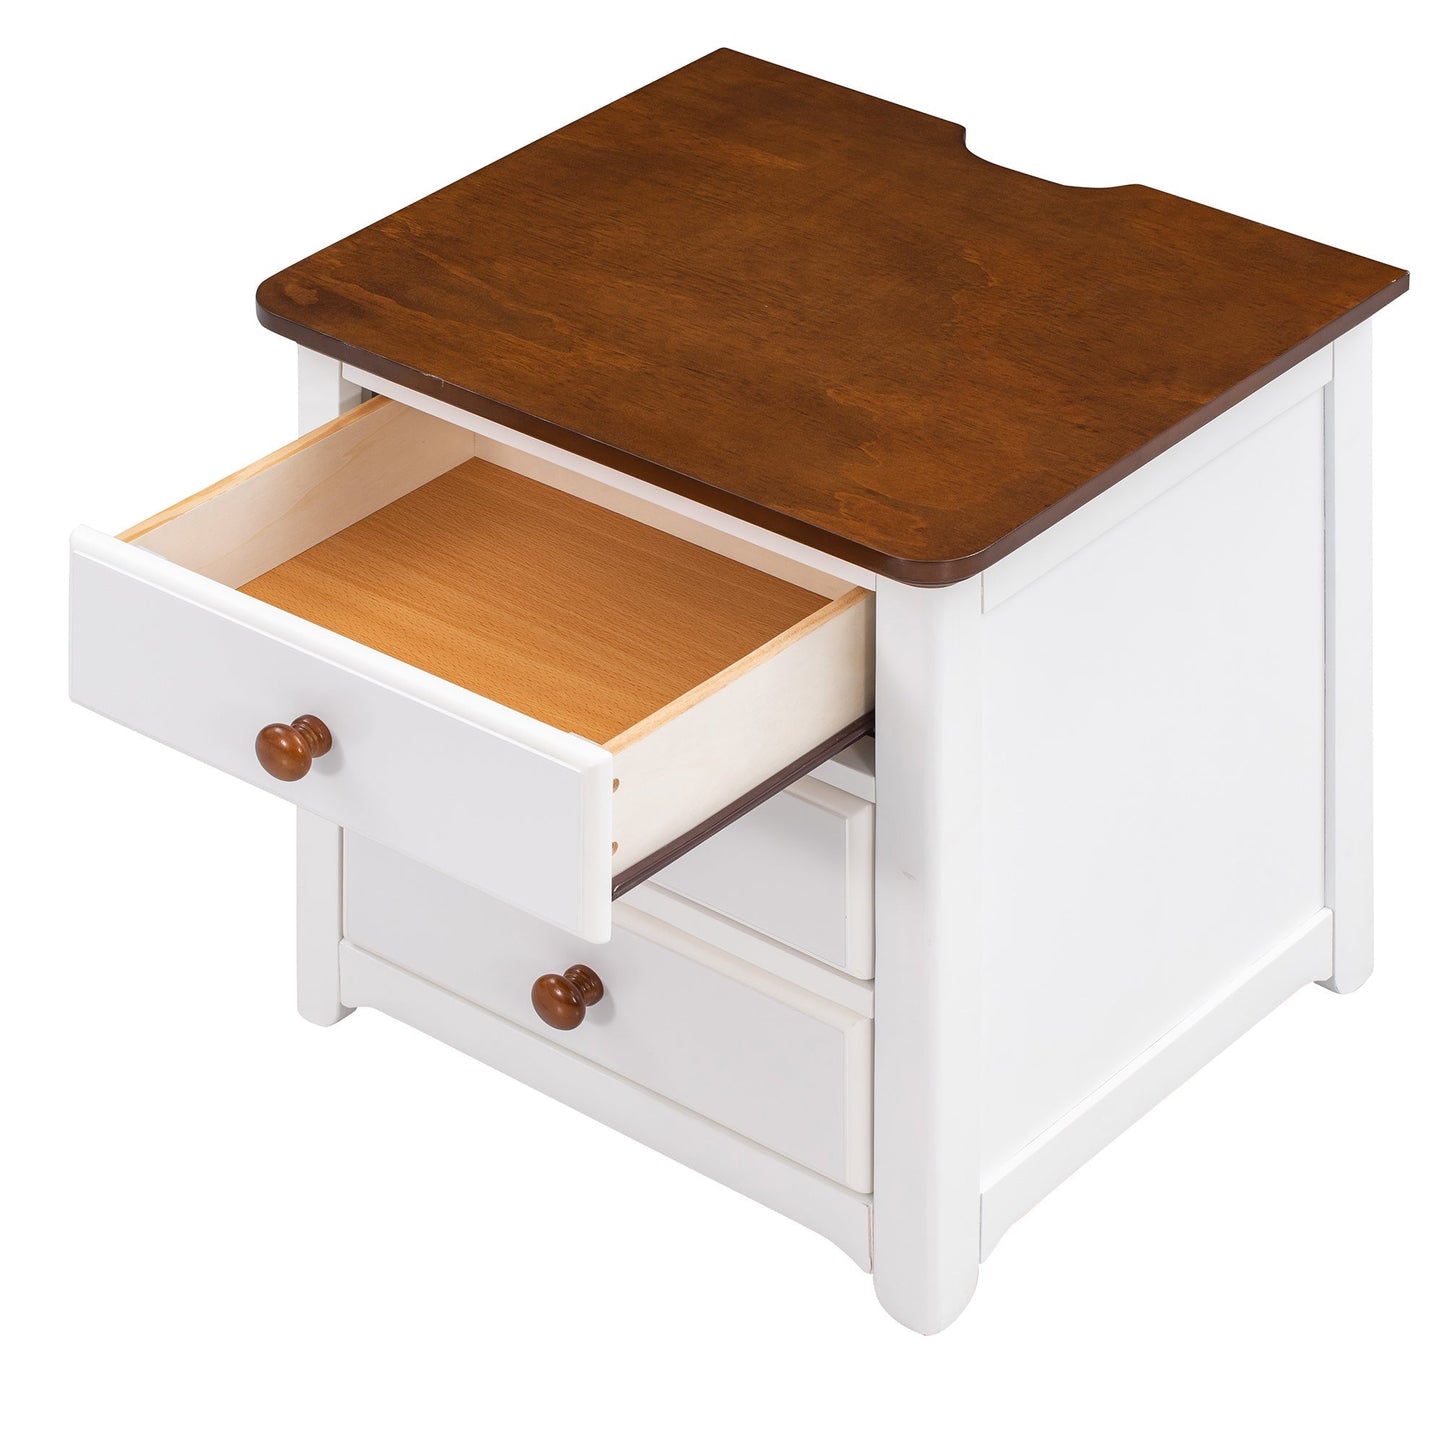 Wooden Nightstand with USB Charging Ports and Three Drawers,End Table for Bedroom,White+Walnut Home Decor by Design